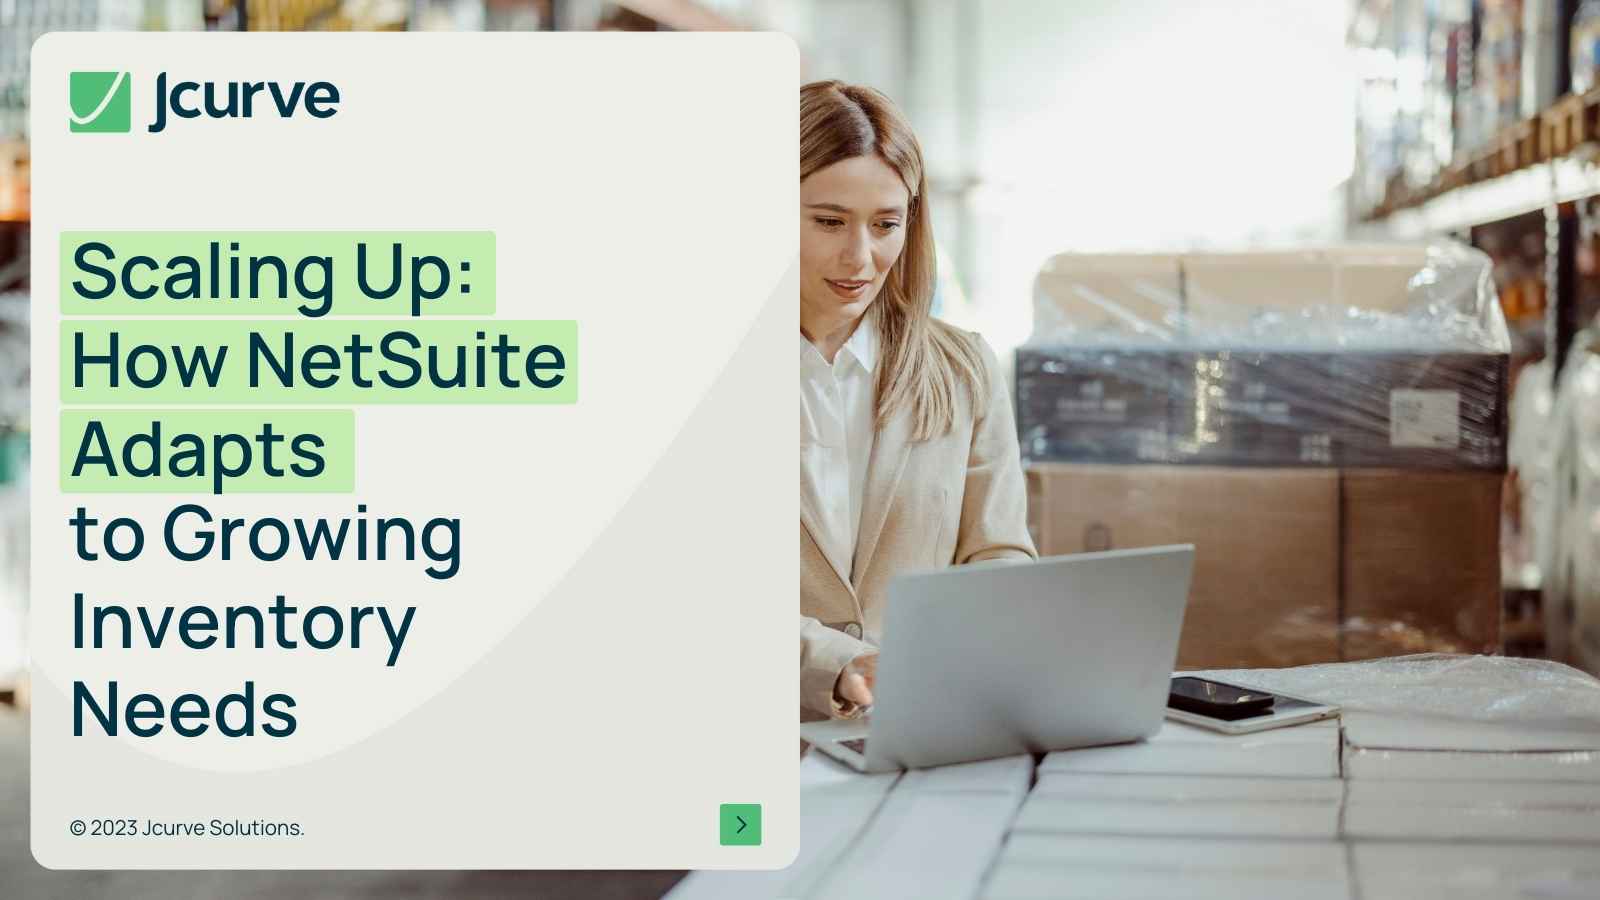 Scaling Up: How NetSuite Adapts to Growing Inventory Needs